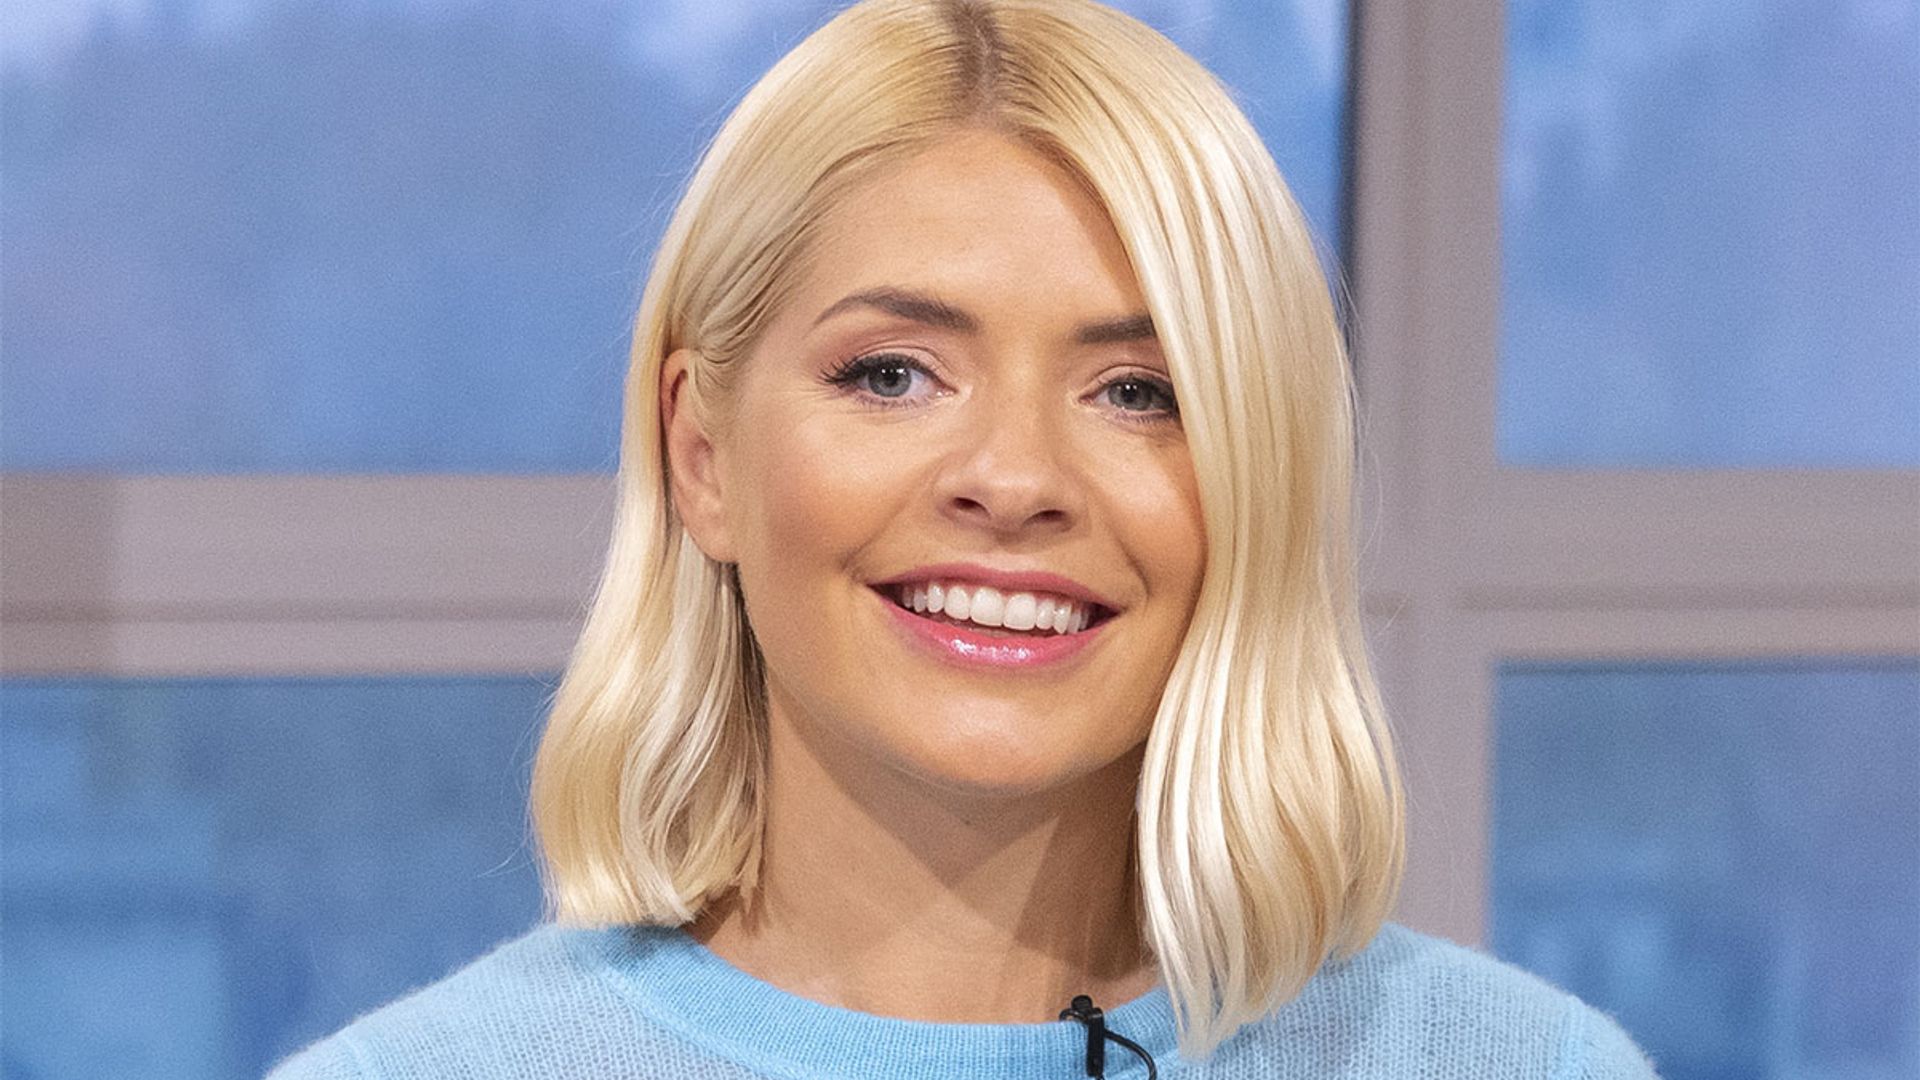 Holly Willoughby reveals striped suit from her M&S spring edit